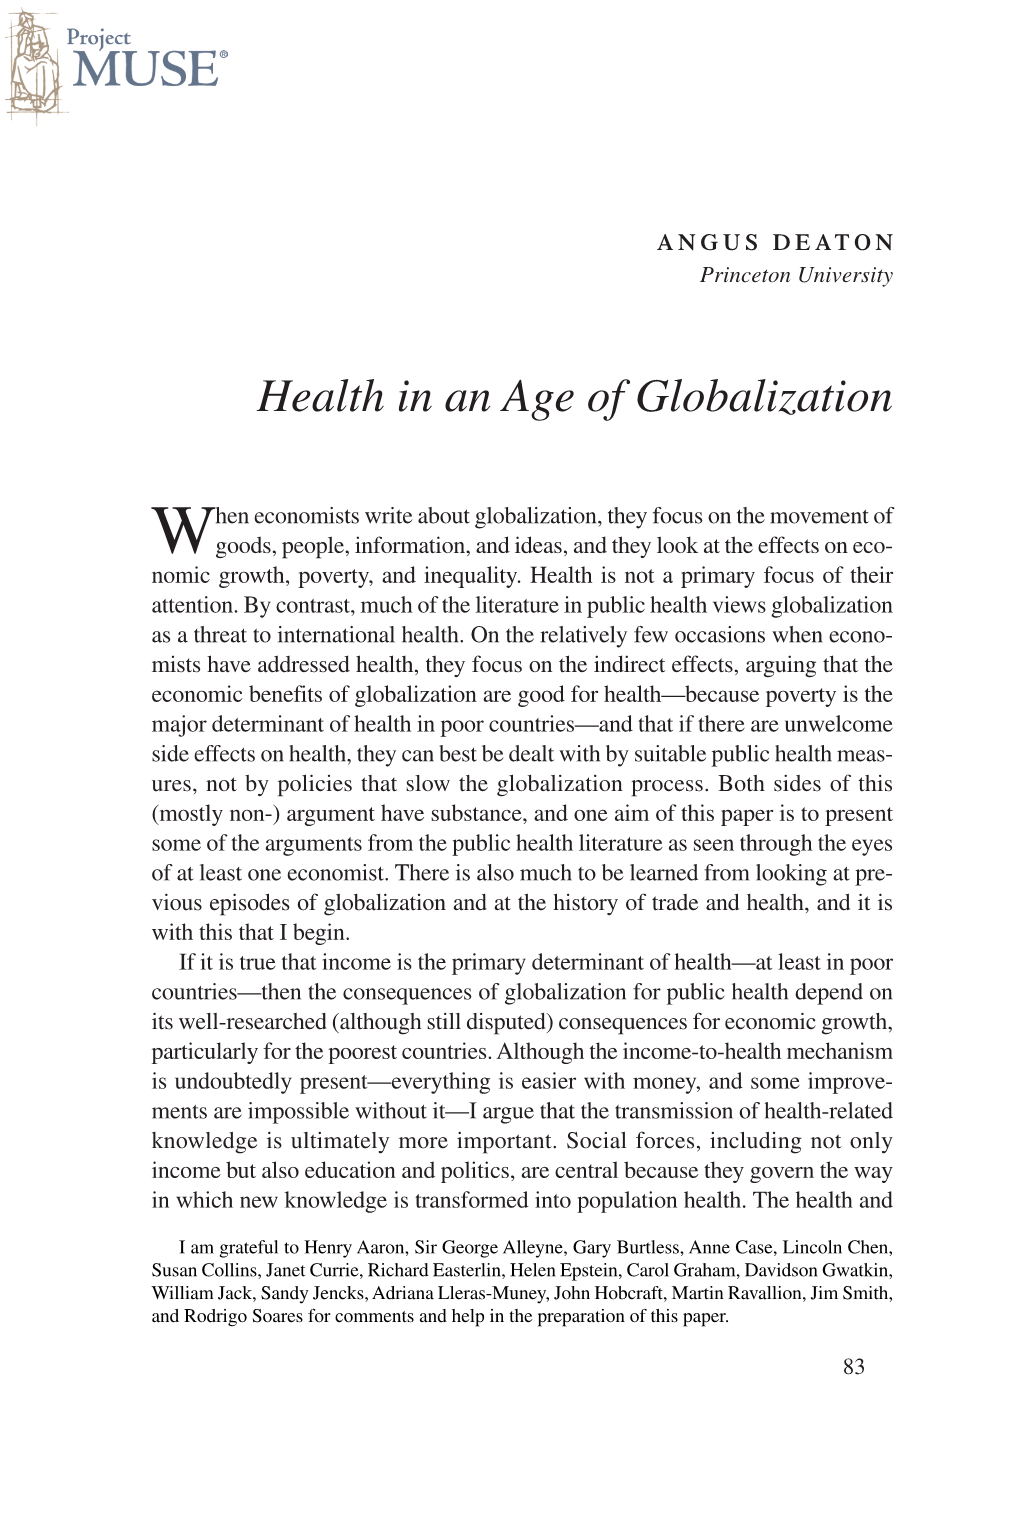 Health in an Age of Globalization